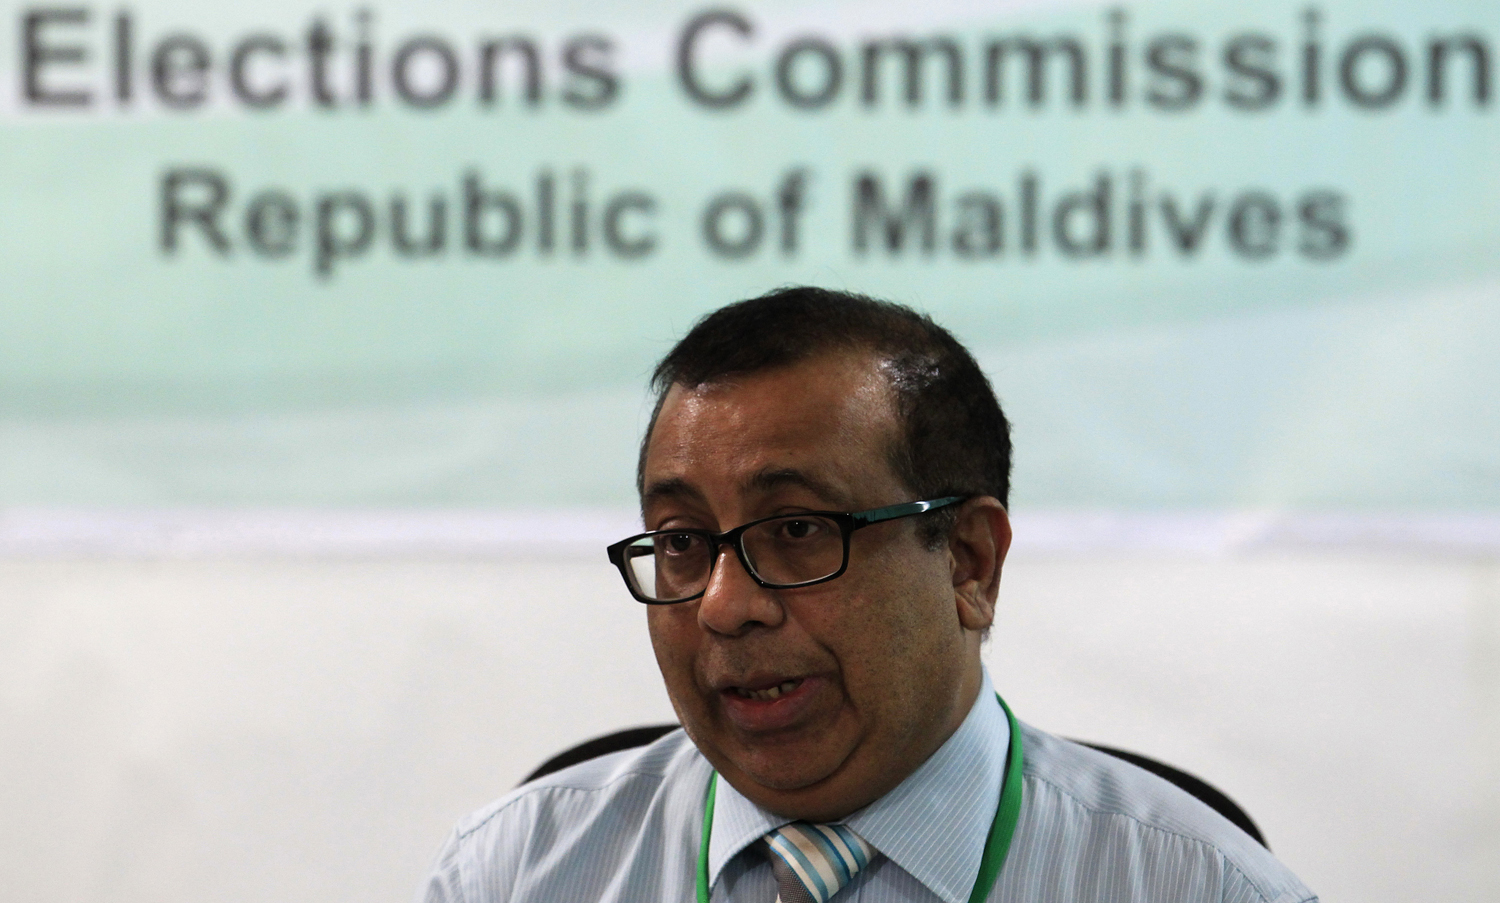 Maldives Election Commissioner Fuwad Thowfeek speaks during a news conference in Male, October 18, 2013. (Dinuka Liyanawatte—Reuters)